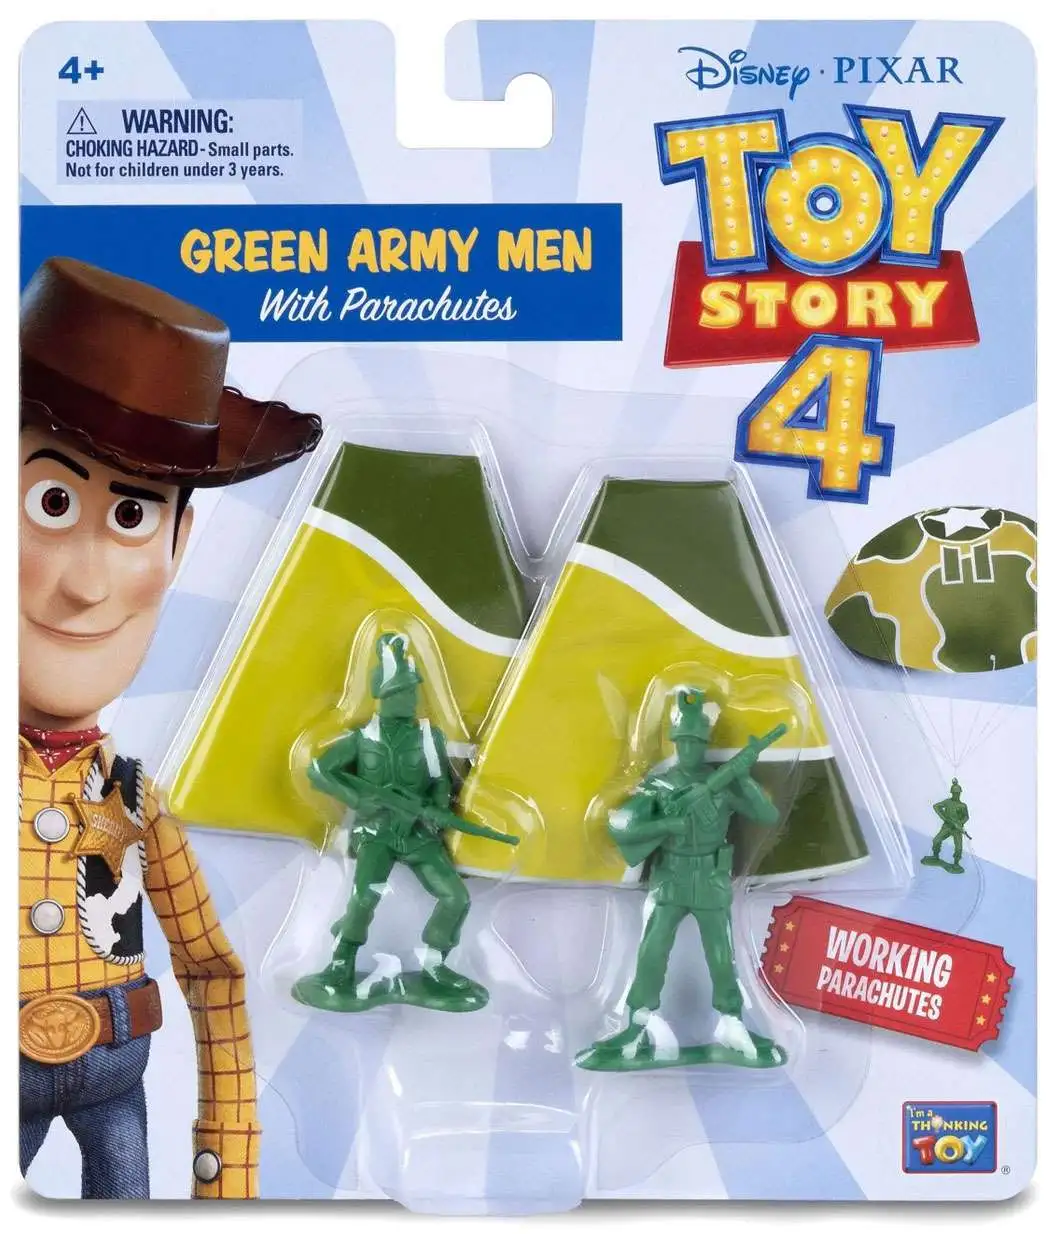 NEW DISNEY PIXAR Toy Story 4 Movie Green Army Men With Working Parachutes New 2 